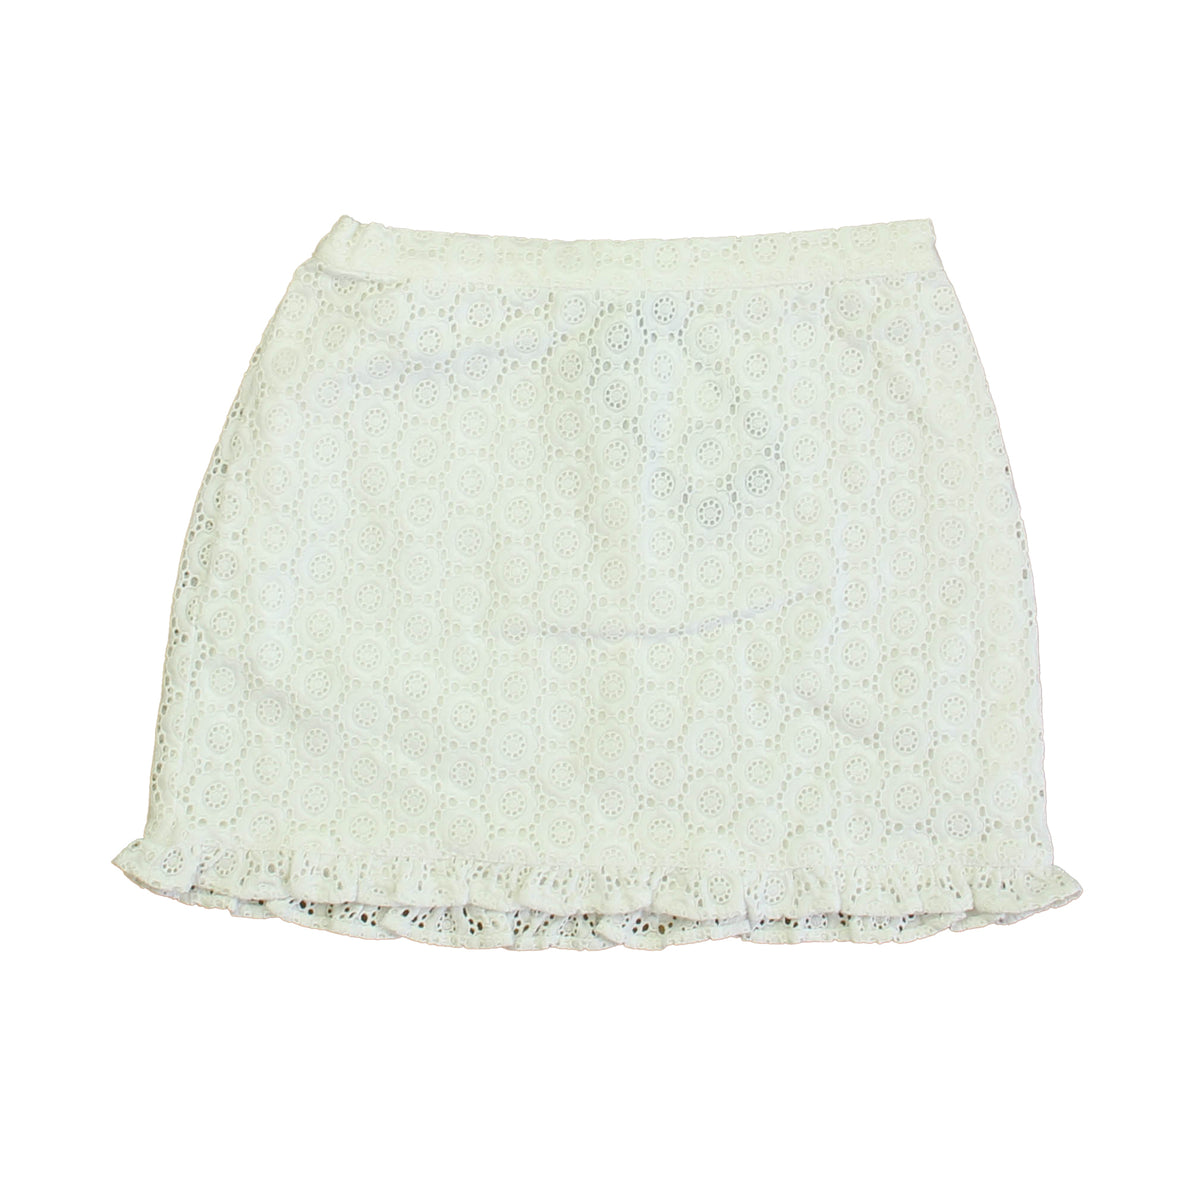 New with Tags: White Eyelet Skirt -- FINAL SALE